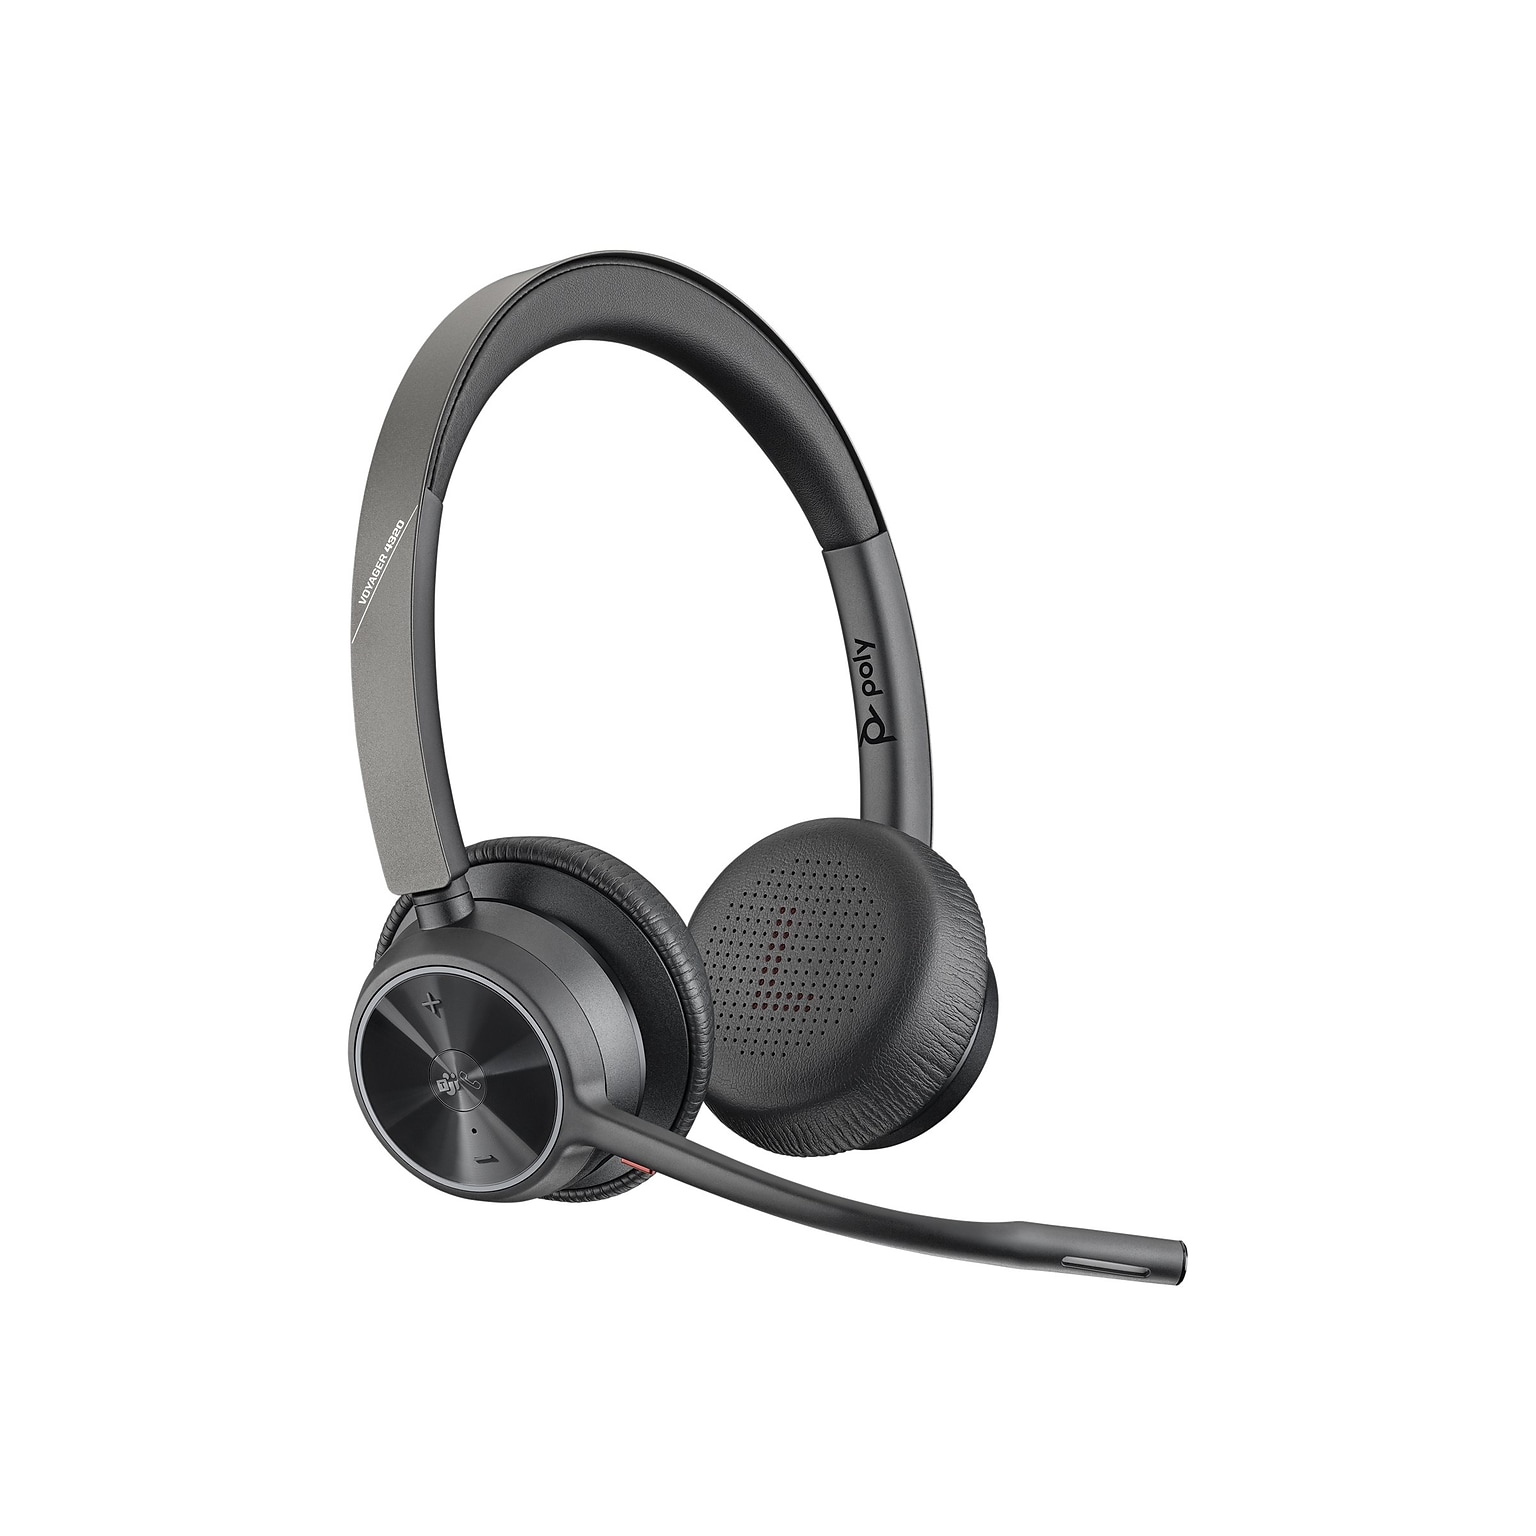 Plantronics Voyager 4320 MS Bluetooth On Ear Computer Headset, Black and Gray (218478-02)